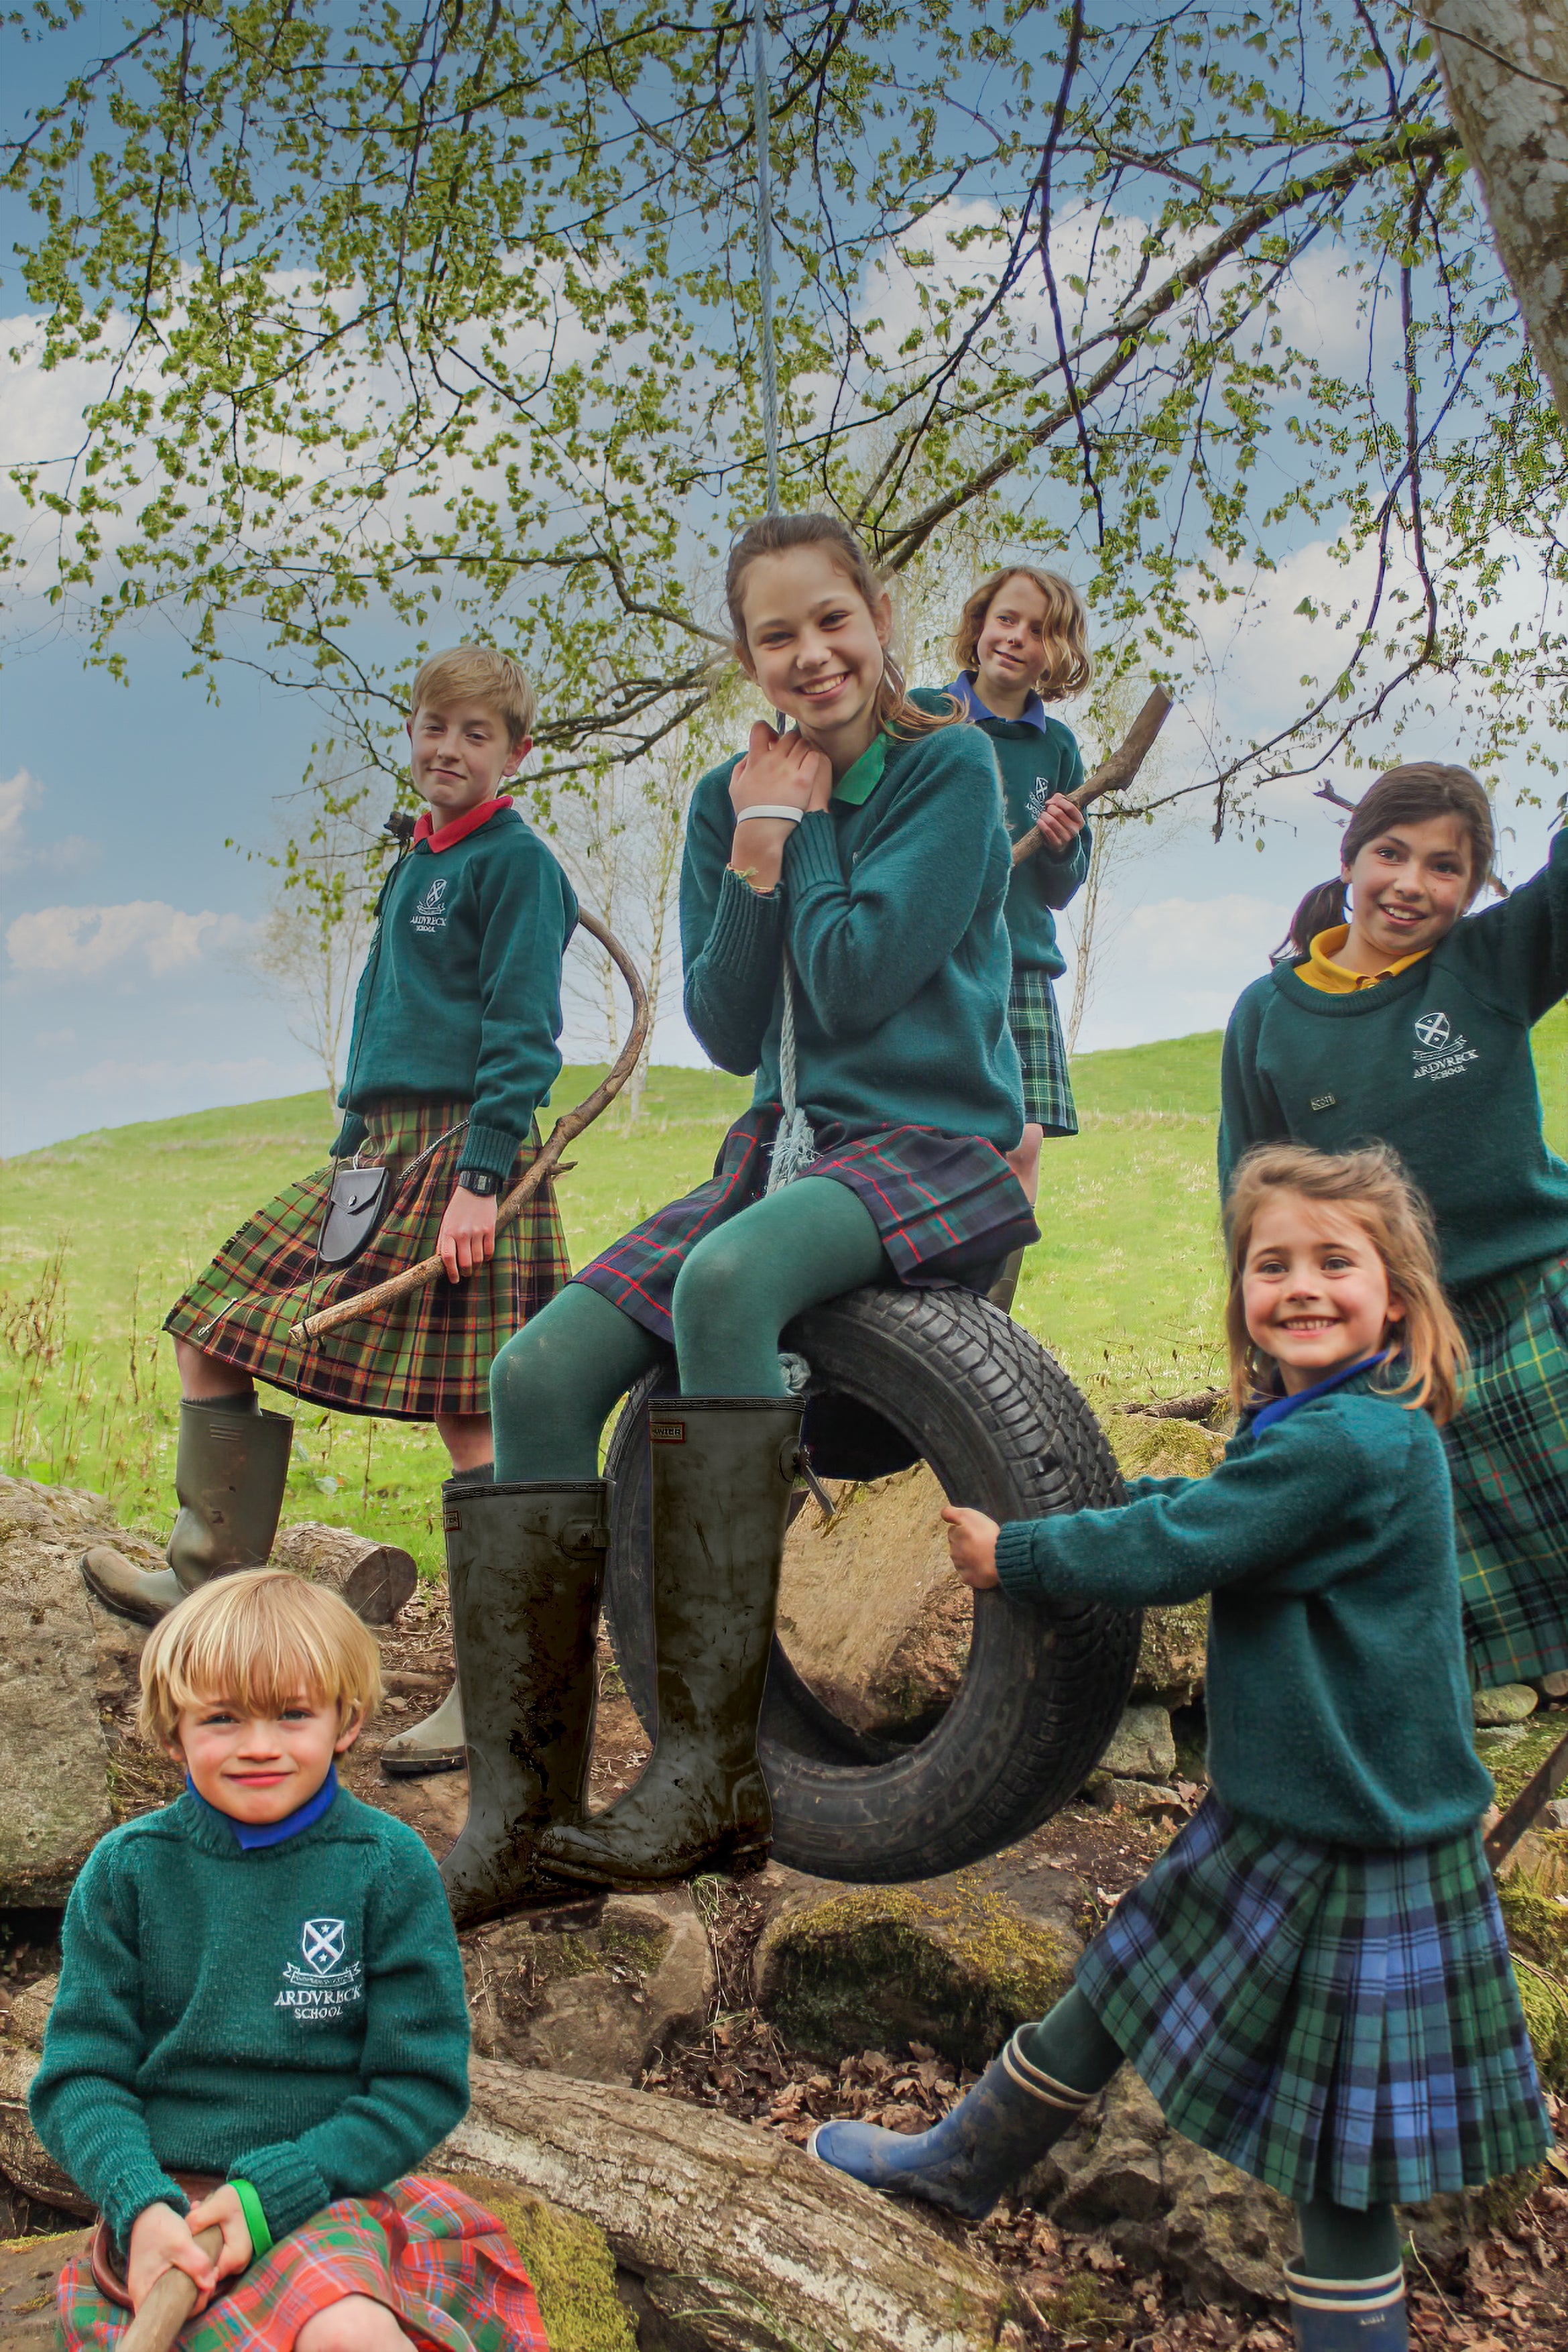 Ardvreck School is the only prep school in the UK to have been chosen to feature in the official commemorative album for the Queen’s Platinum Jubilee (Ardvreck School/PA)